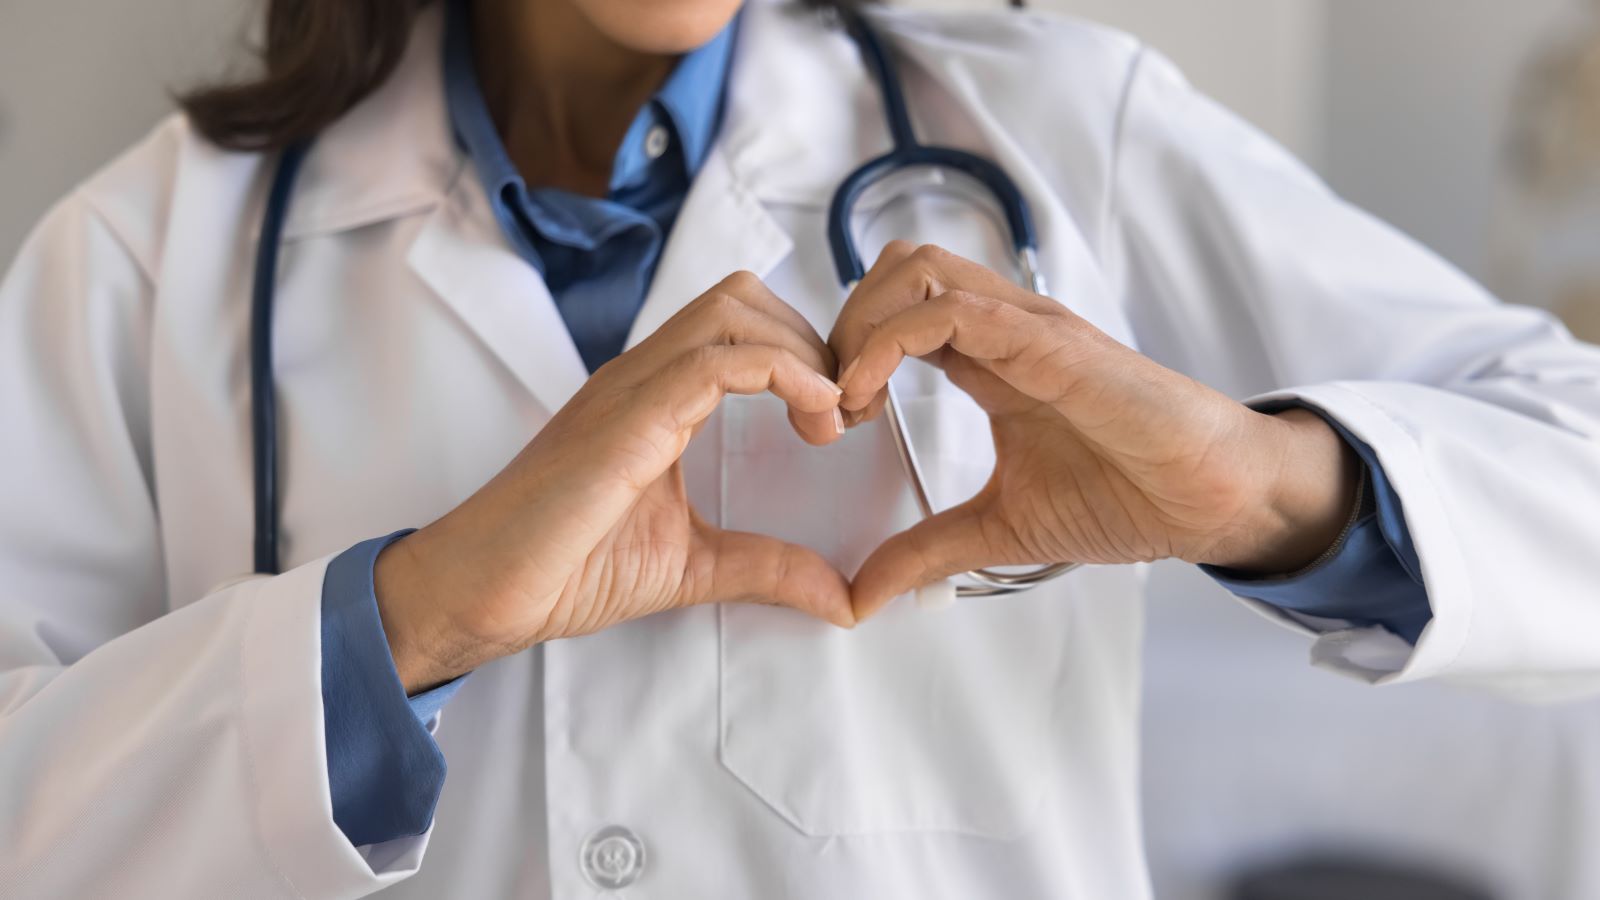 When to See a Doctor for an Irregular Heartbeat